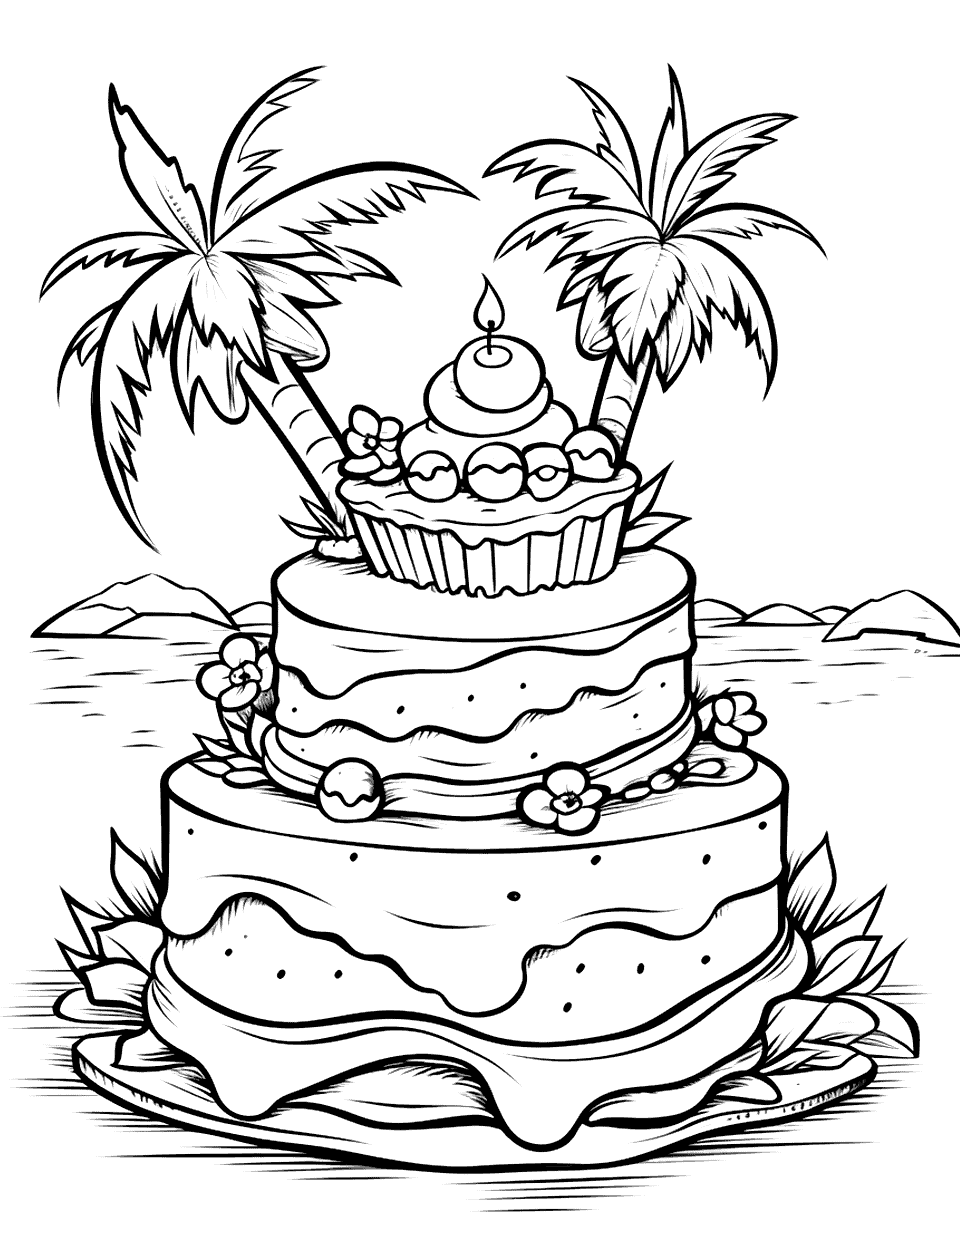 Island Adventure Cake Coloring Page - A cake with an island theme, including a beach and palm trees.